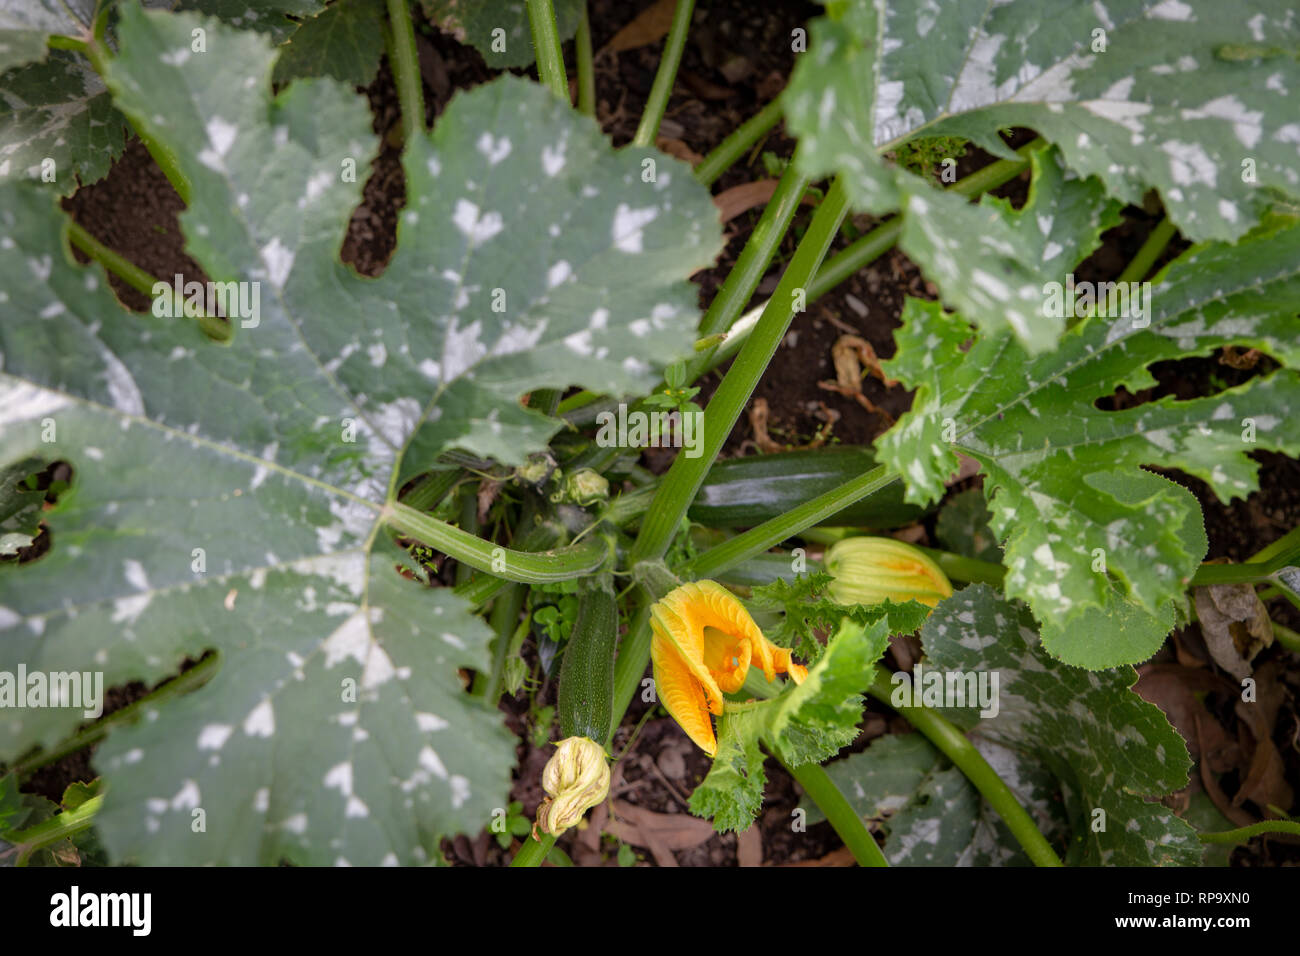 Healthy courgette plants flowering and producing new young vegetables in Canterbury, New Zealand Stock Photo